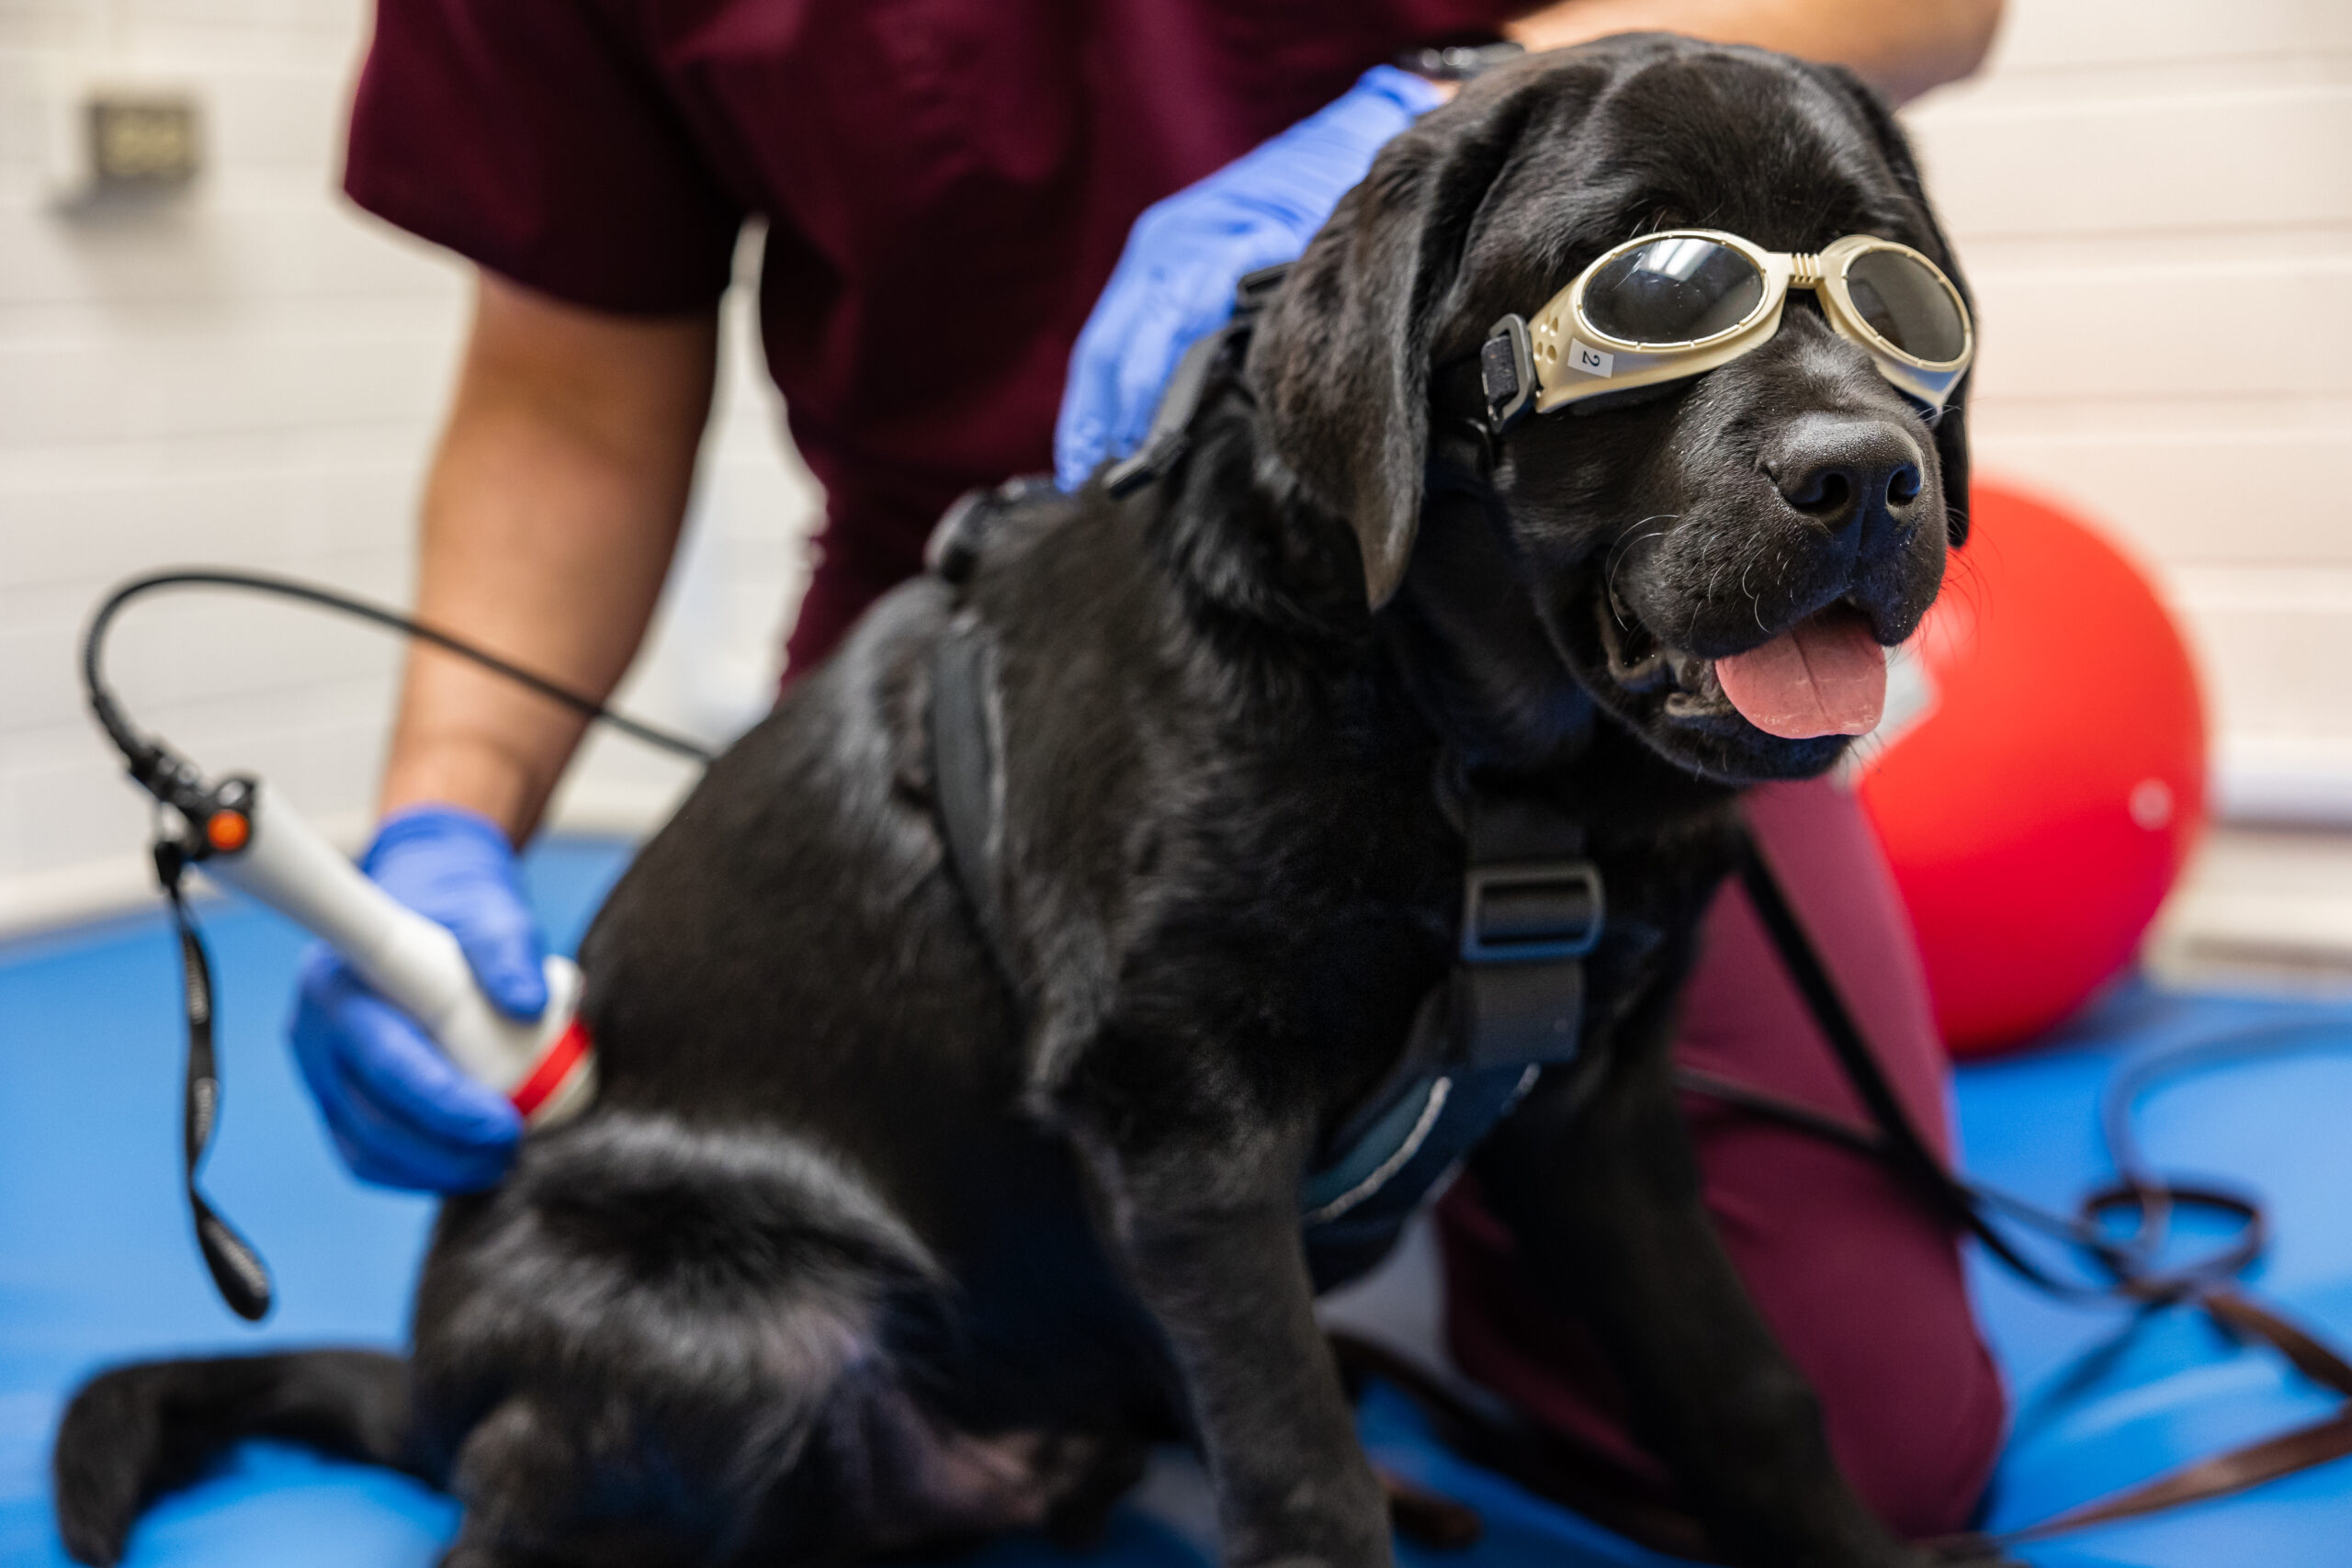 Betting On Parlay: Puppy Overcomes Tetanus With Help From Texas A&M Veterinarians